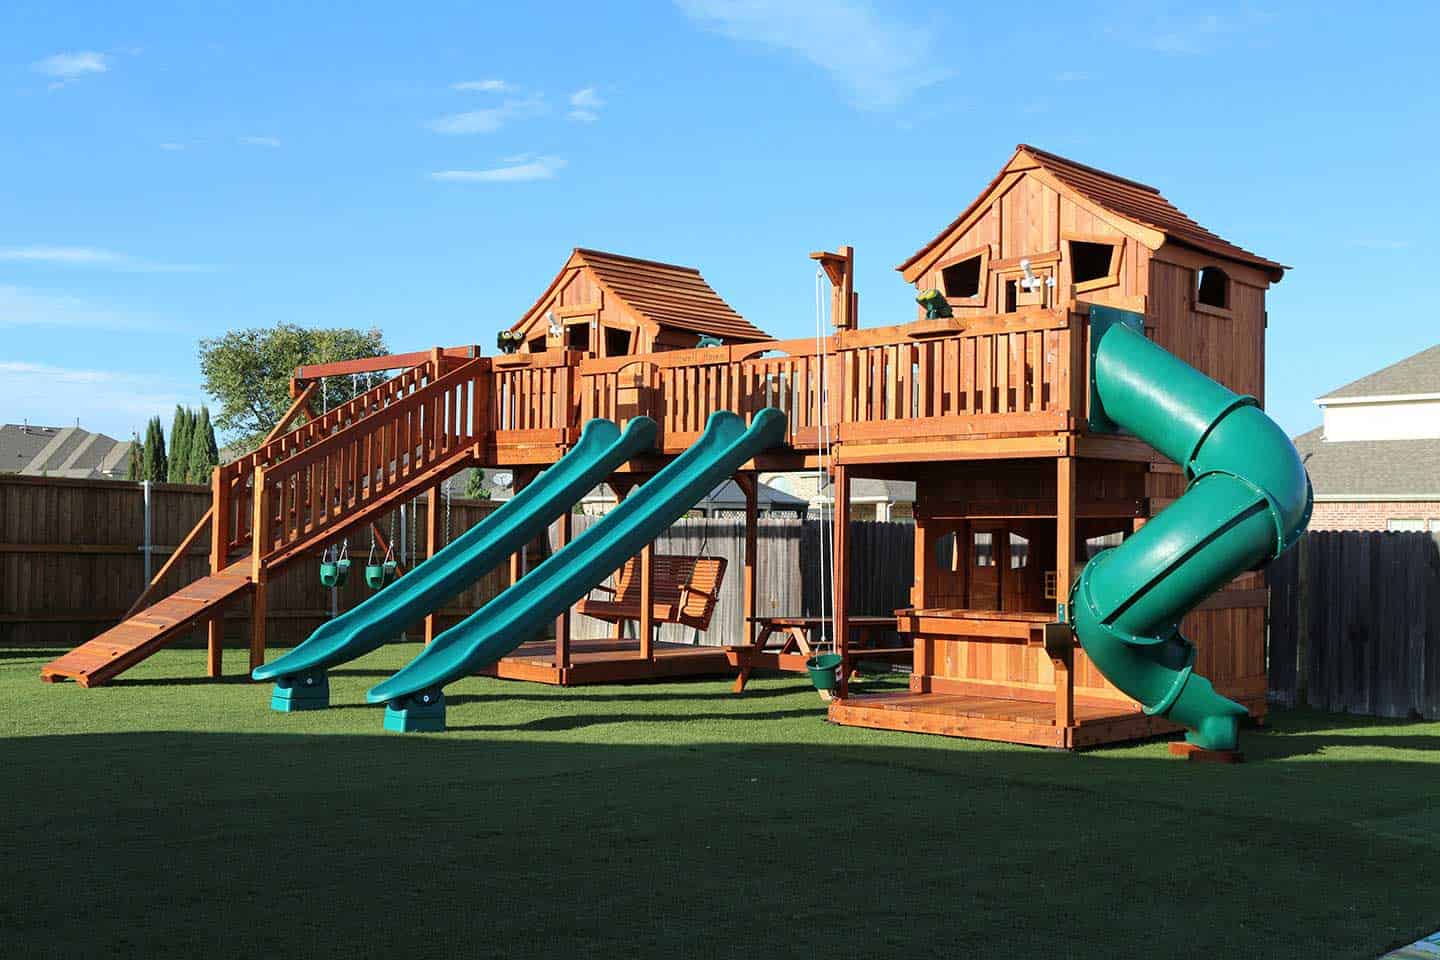 Bridged redwood playset with swings and adult porch swing. Spiral slide and rocket slides accessorize this fun backyard swing set.